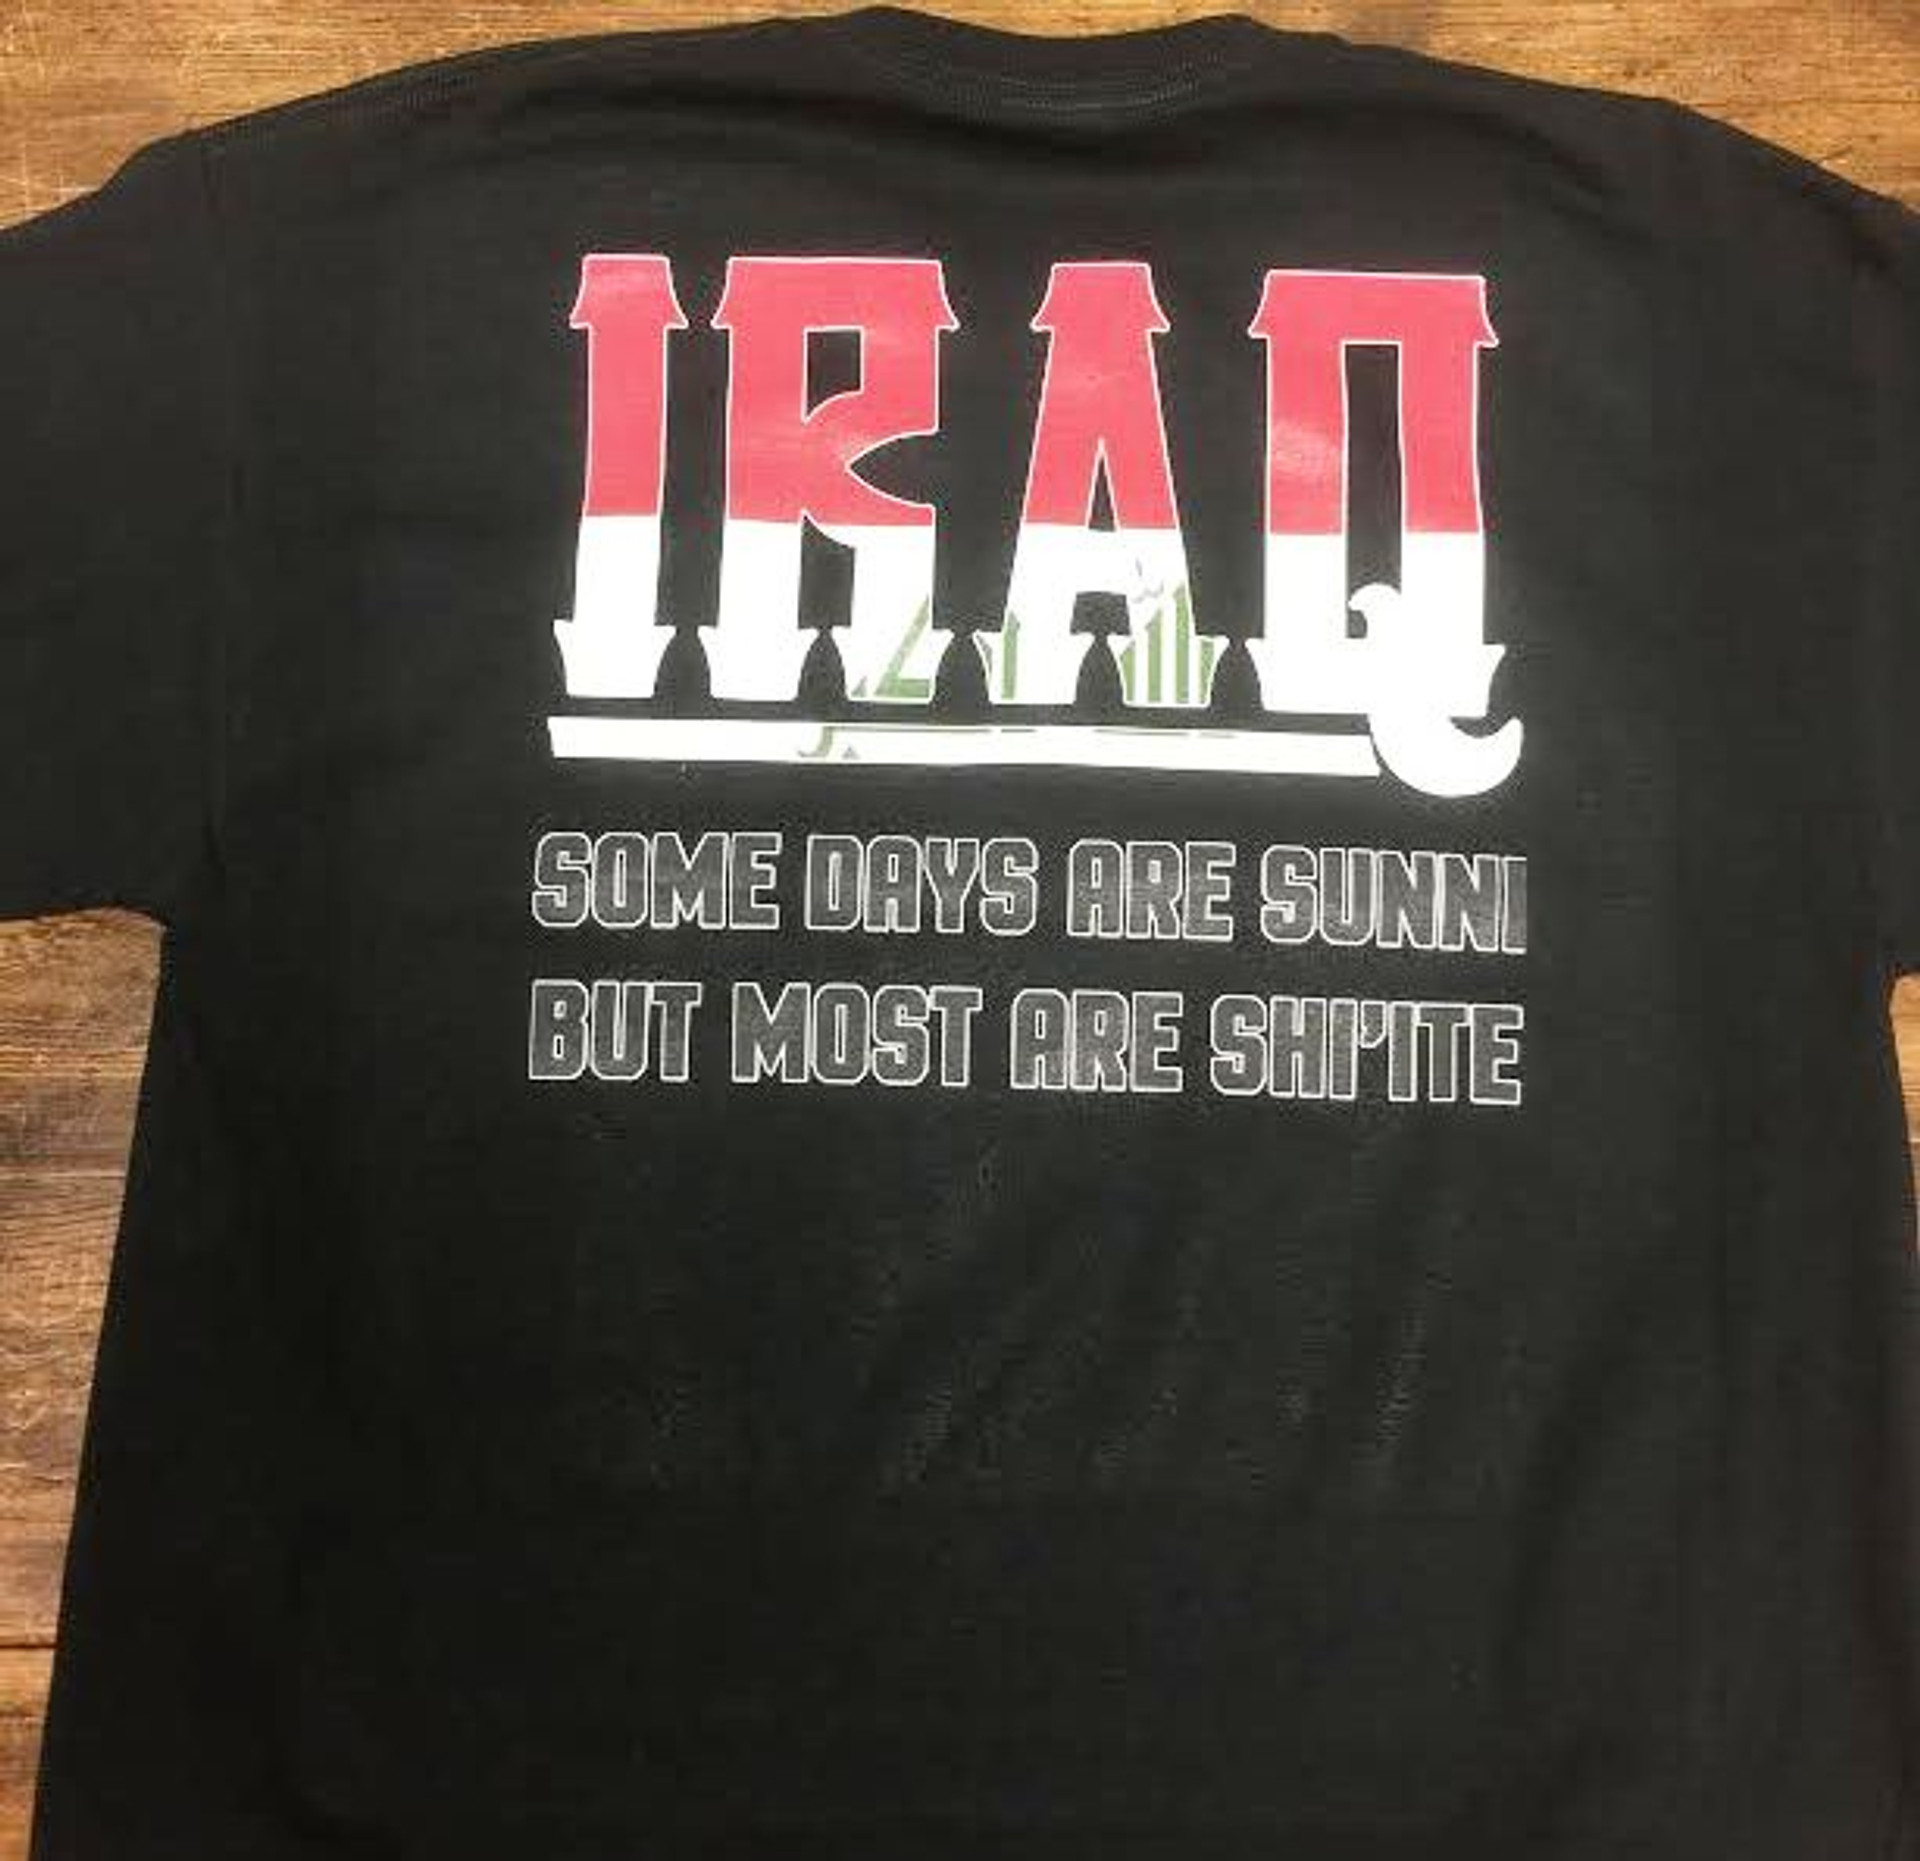 Iraq Some Days Are Sunni But Most Are Shi'Ite Shirt and motorcycle shirts